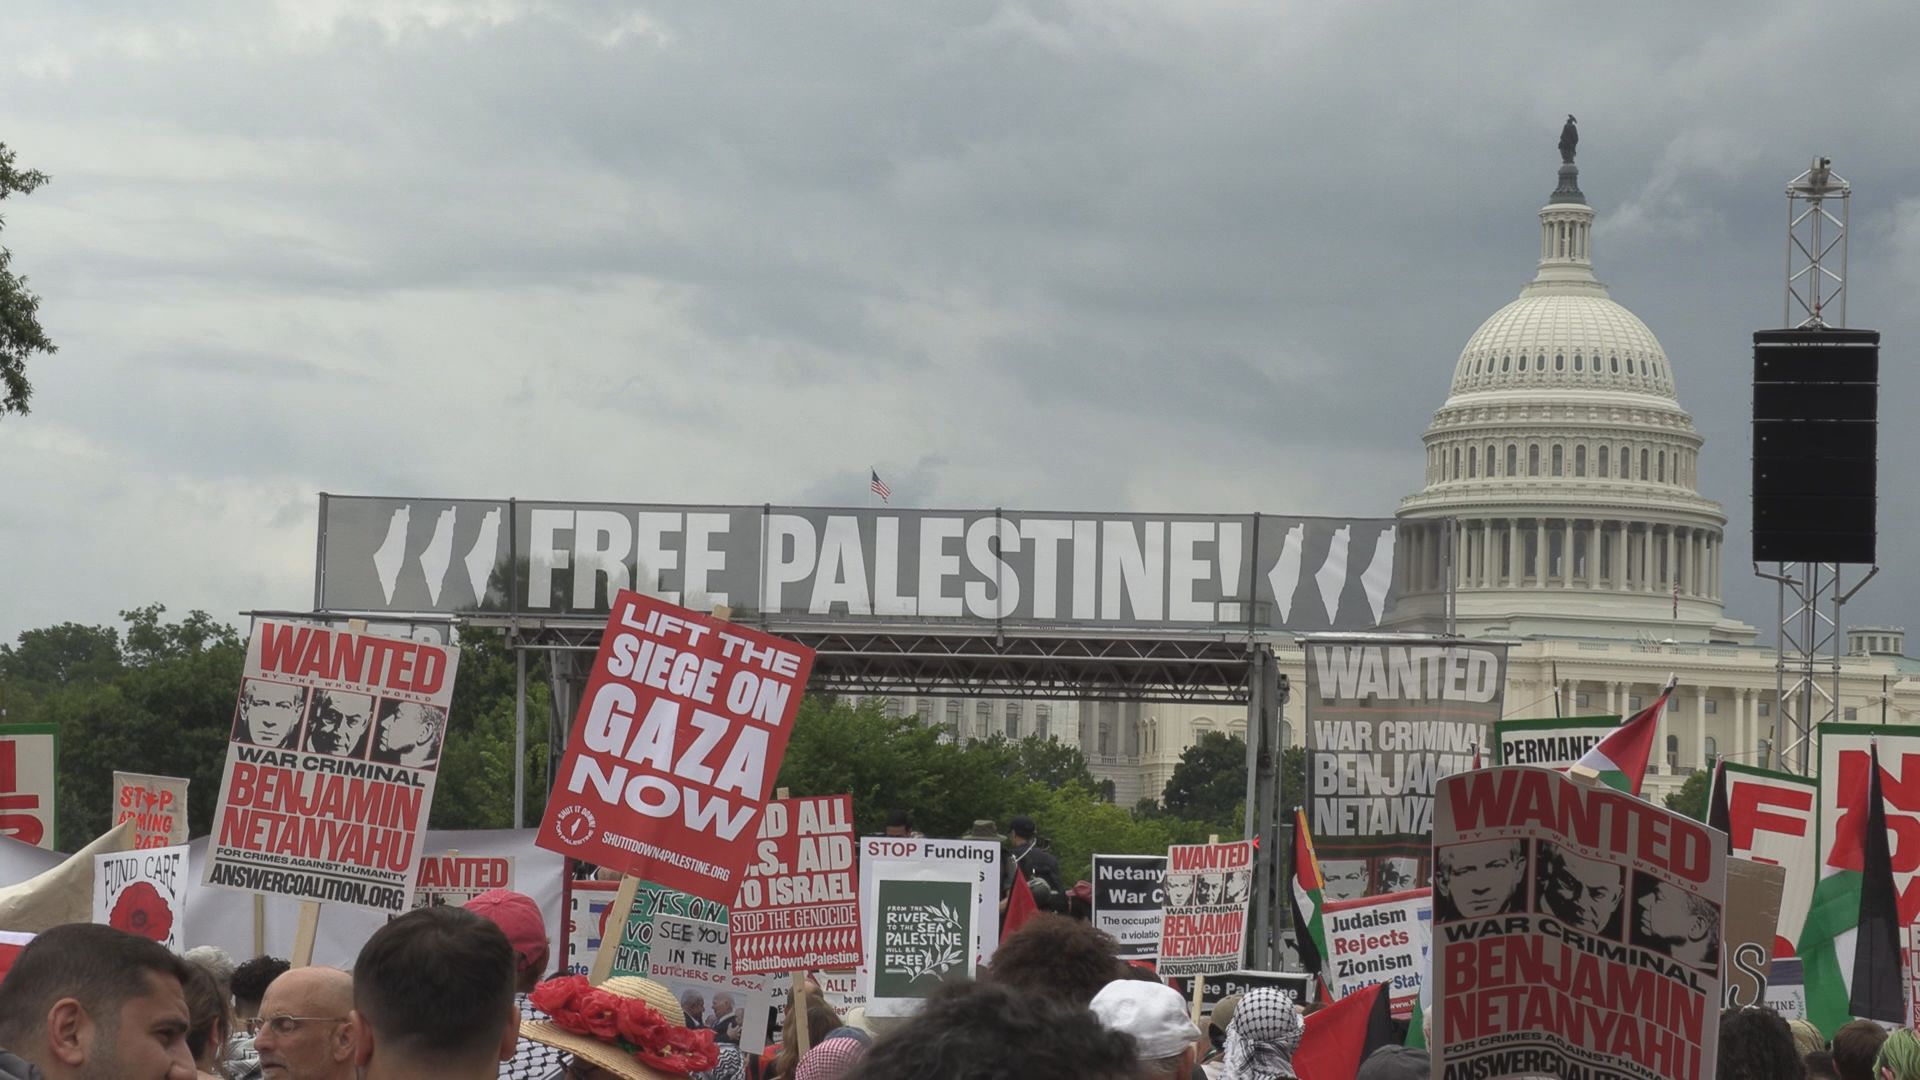 Pro-Palestine Supporters Protest Outside US Capitol During Netanyahu Visit